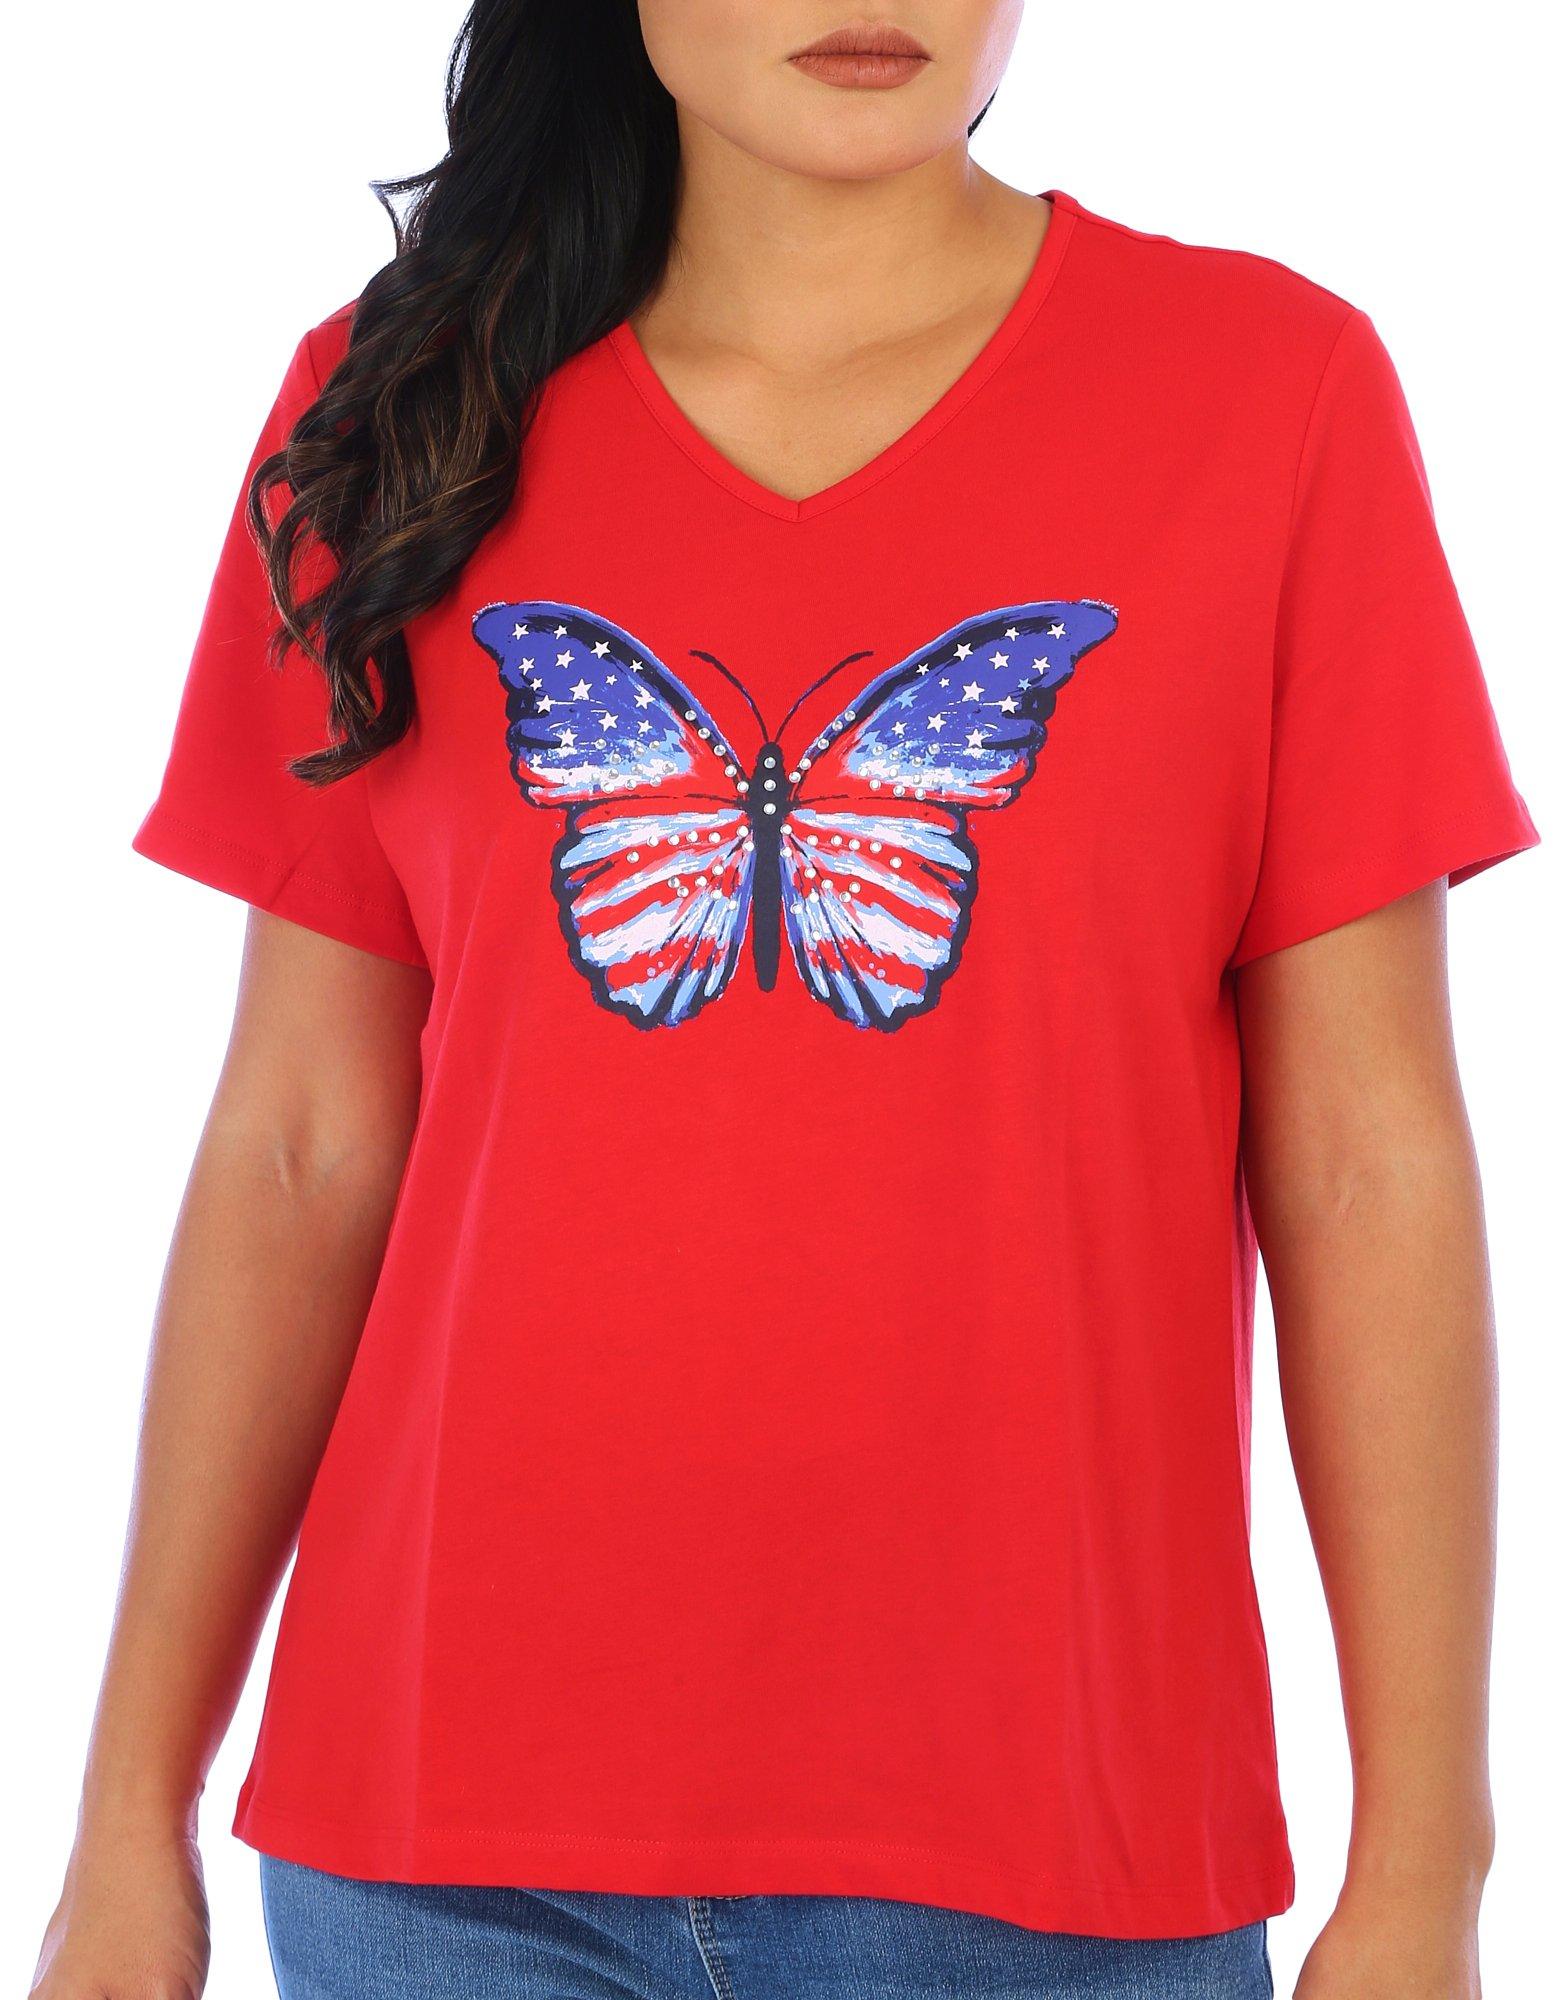 Coral Bay Womens Americana Jewel Butterfly Short Sleeve